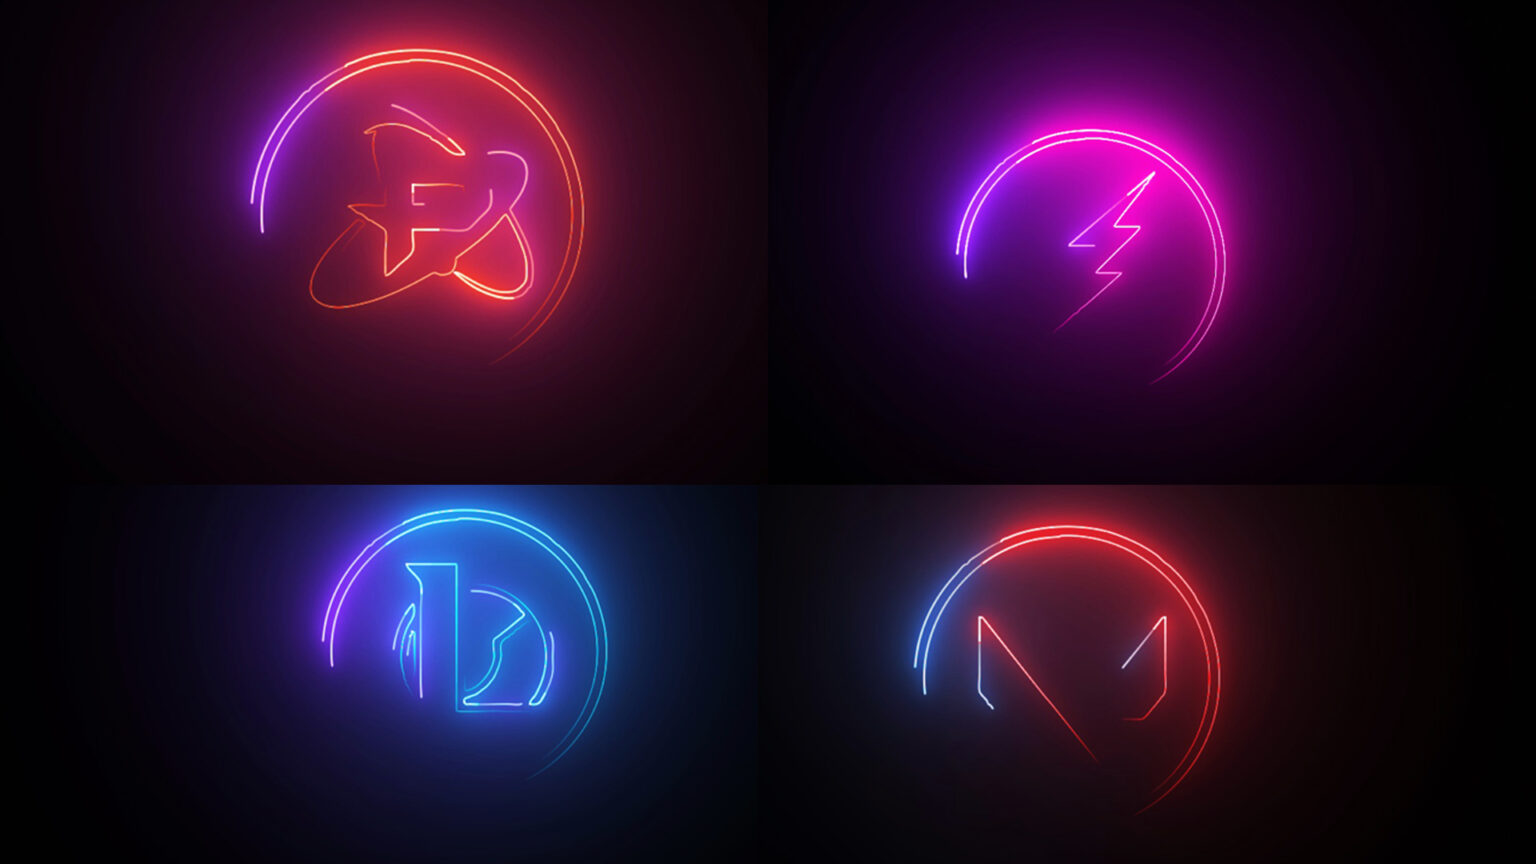 after-effects-neon-logo-reveal-intro-template-60-free-download-rkmfx